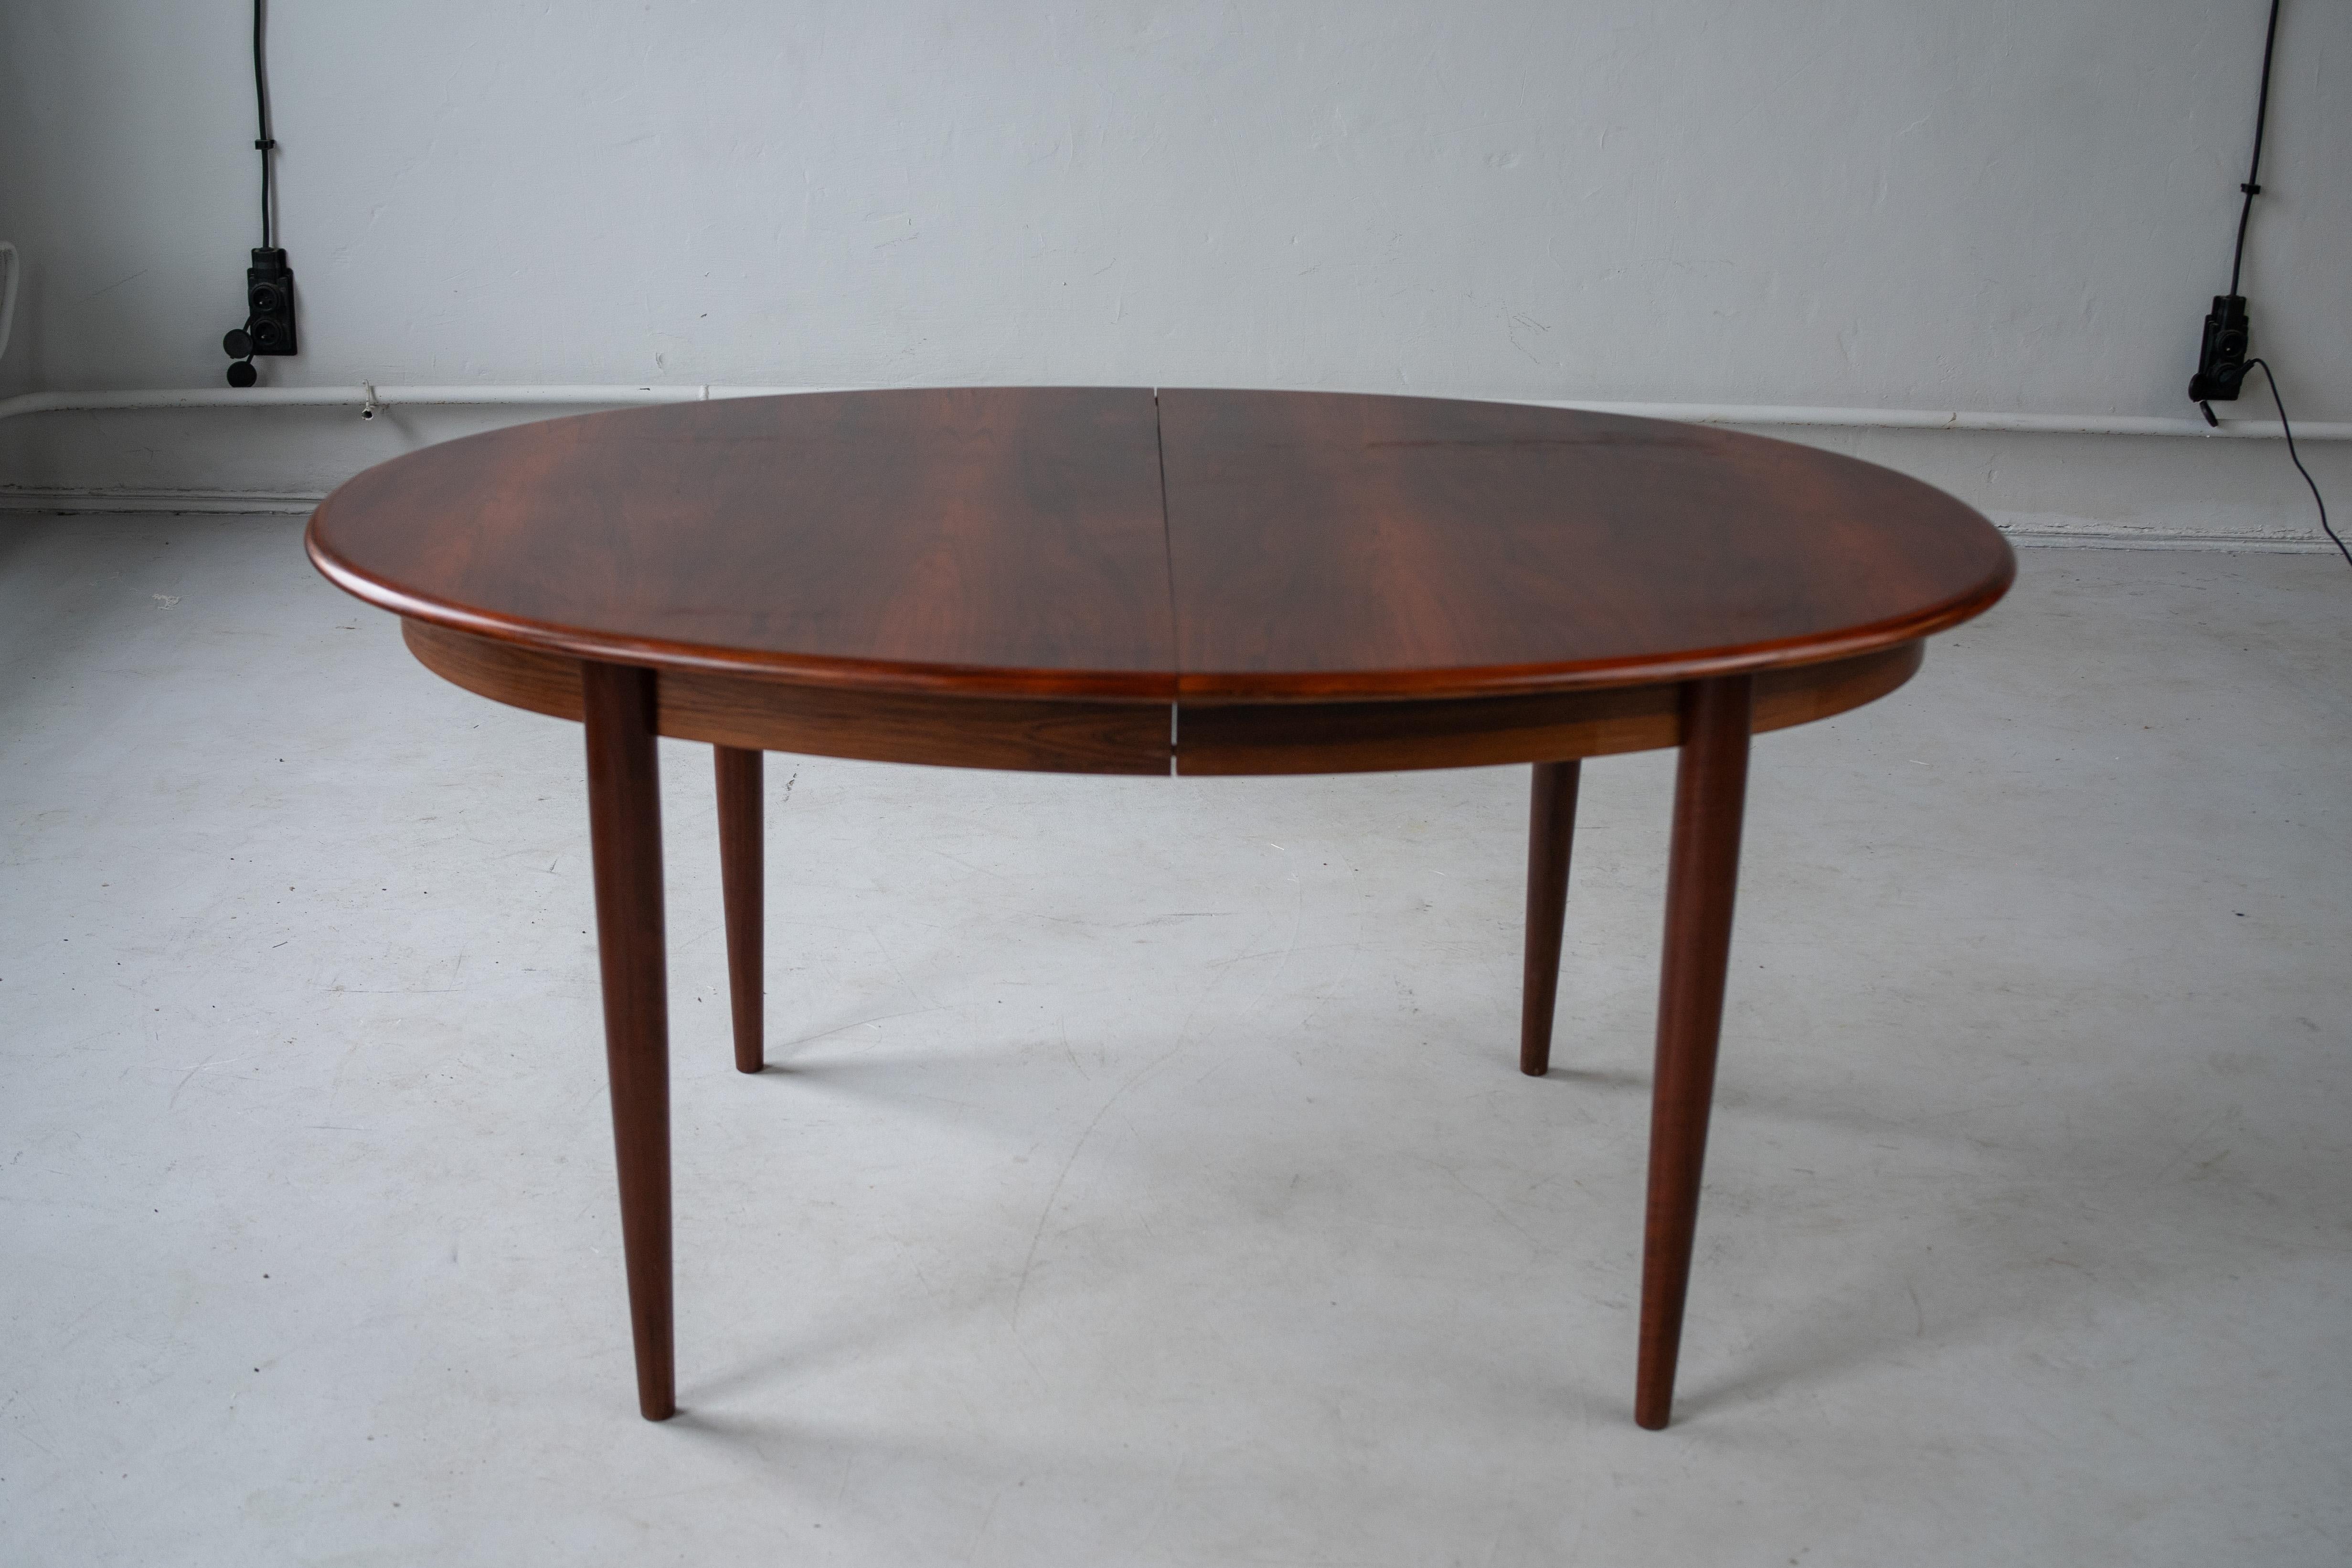 Wooden oval table, produced in Denmark by Gudme Mobelfabrik.
This table is extendeble, dark brown, mid-century piece.